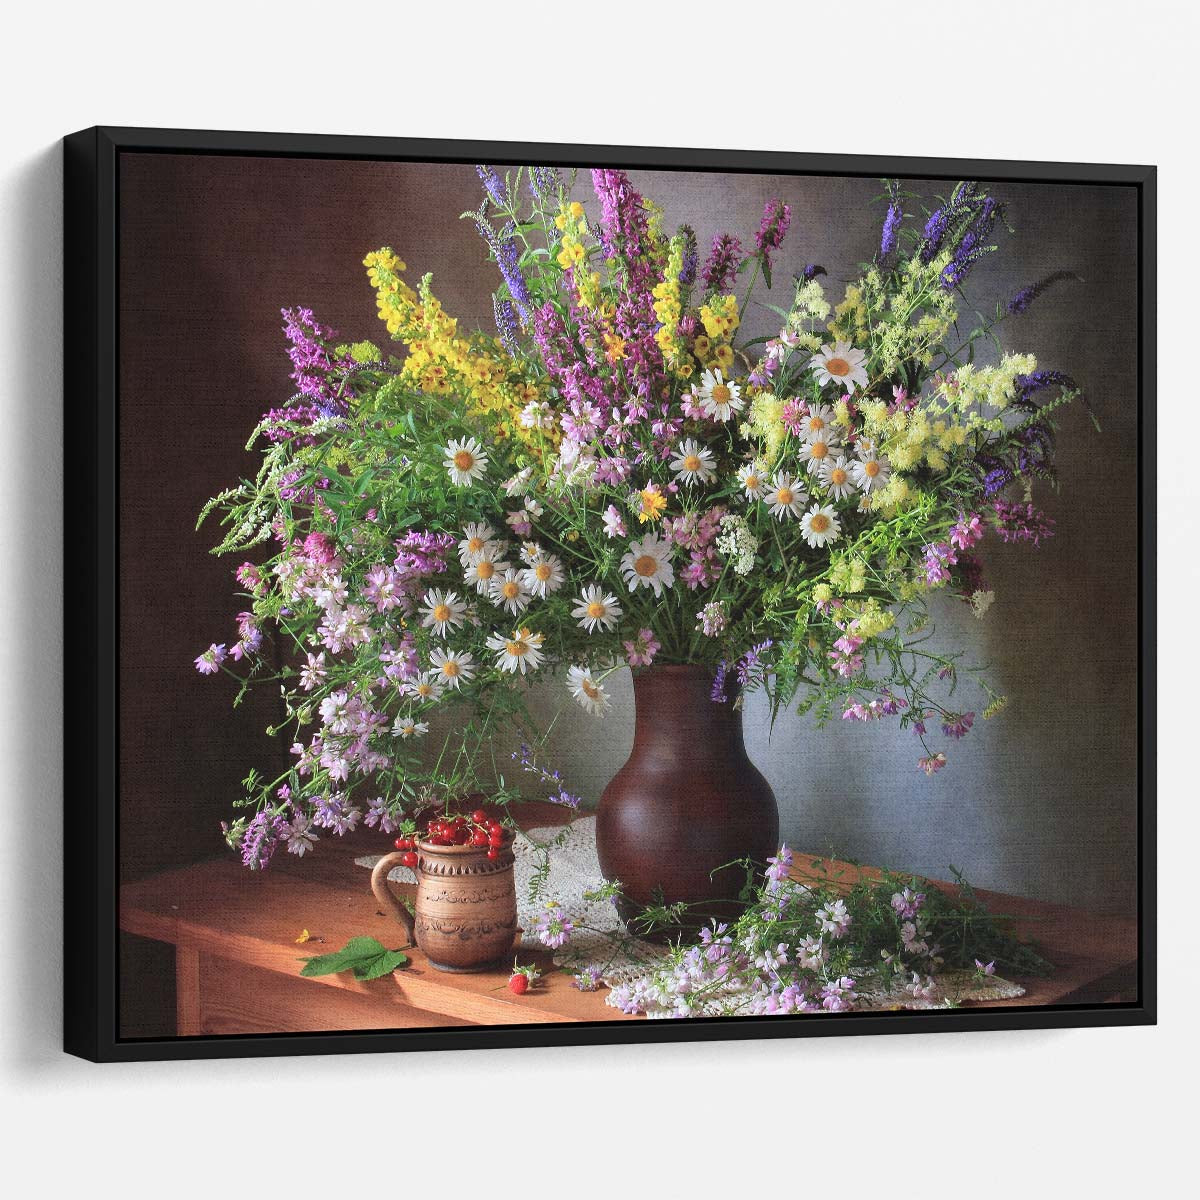 Summer Blossom & Berry Vase Floral Wall Art by Luxuriance Designs. Made in USA.